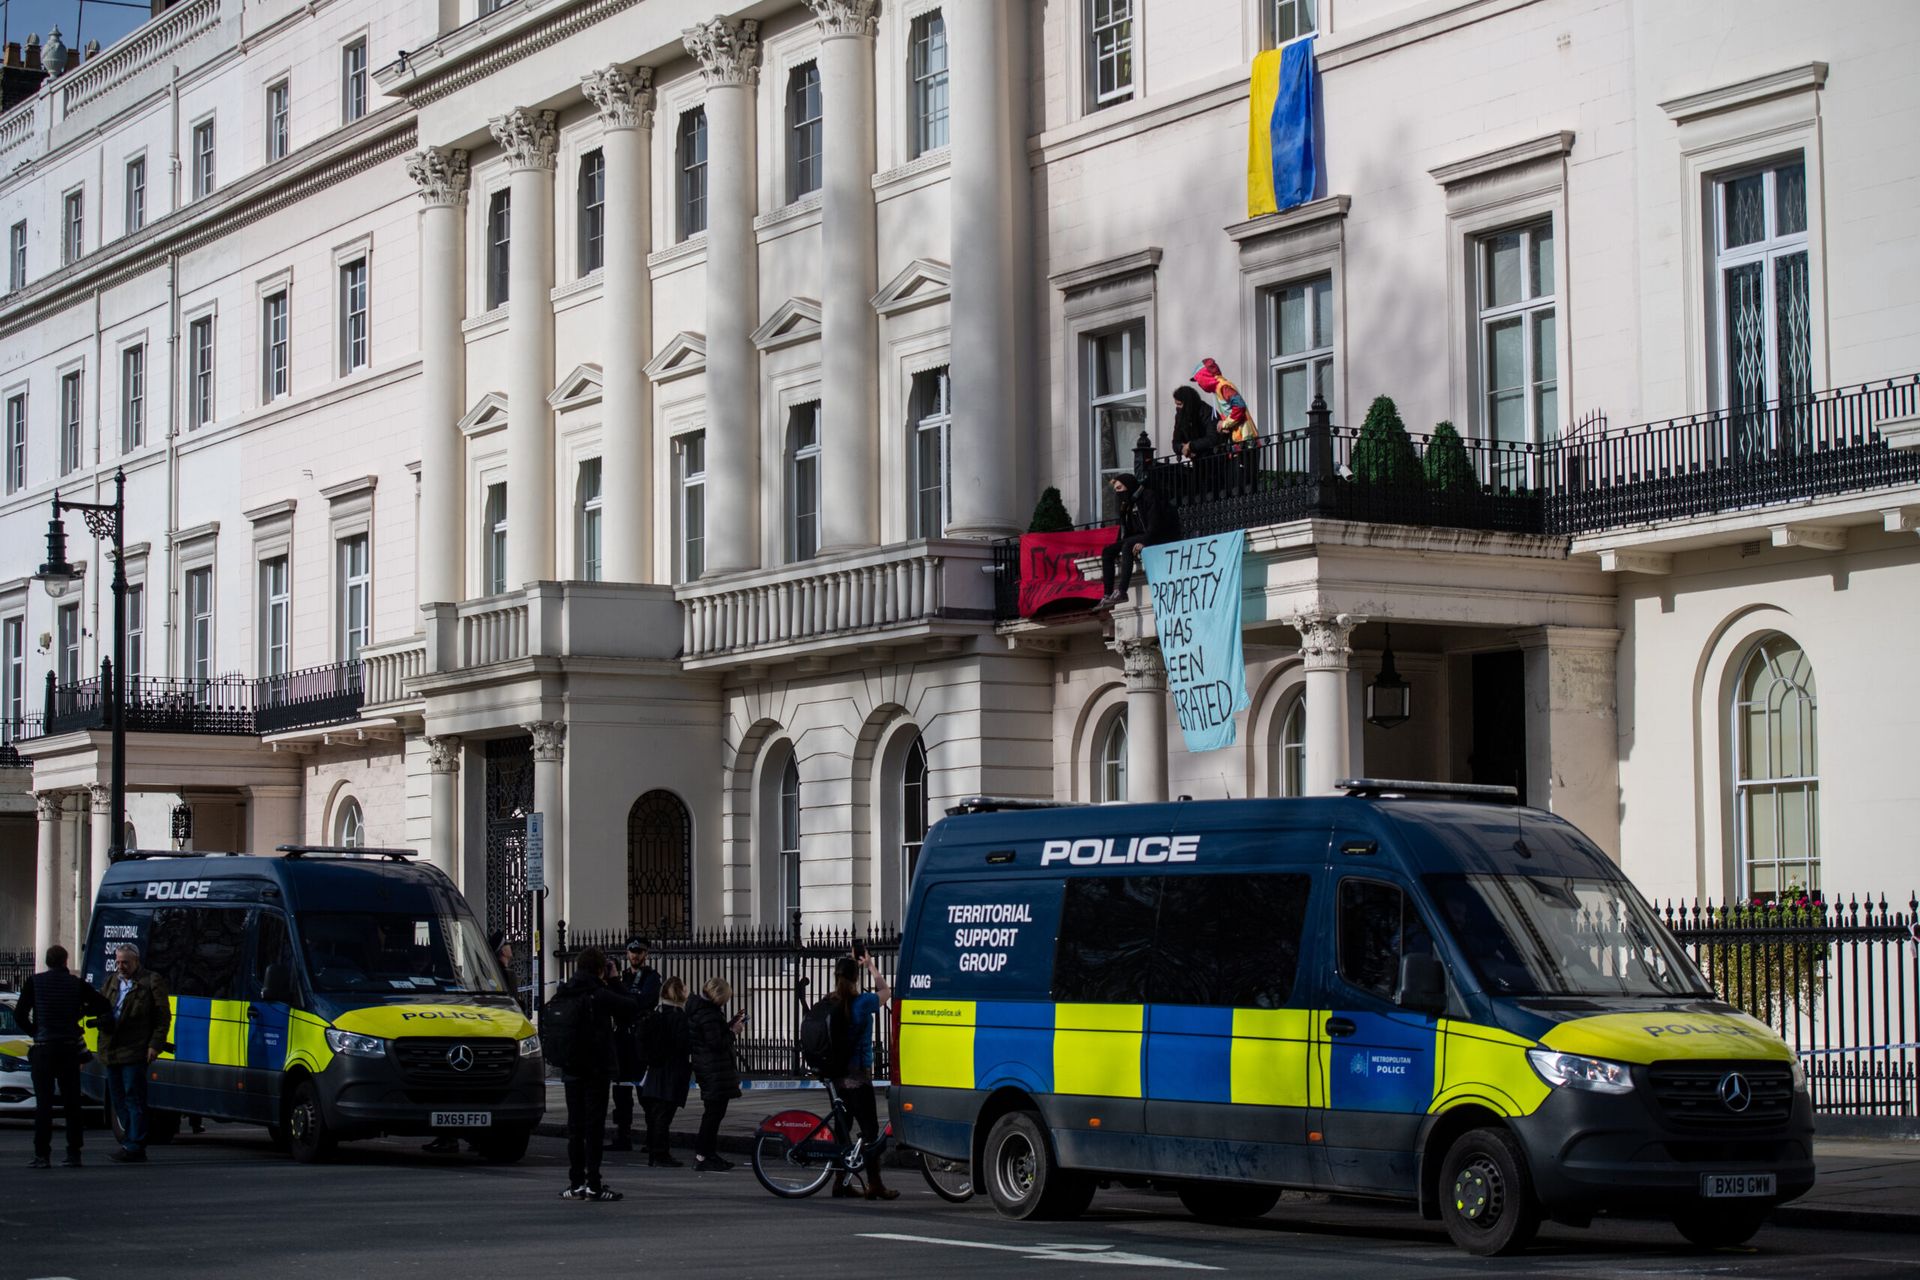 LONDON, ENGLAND &#8211; MARCH 14: Protesters occupy a building reported to belong to Russian oligarch Oleg Deripsaka on March 14, 2022 in London, England. Overnight, protesters broke into 5 Belgrave Square, which reportedly belongs to the family of Oleg Deripaska, a wealthy Russian recently sanctioned by the UK government as part of its response to...